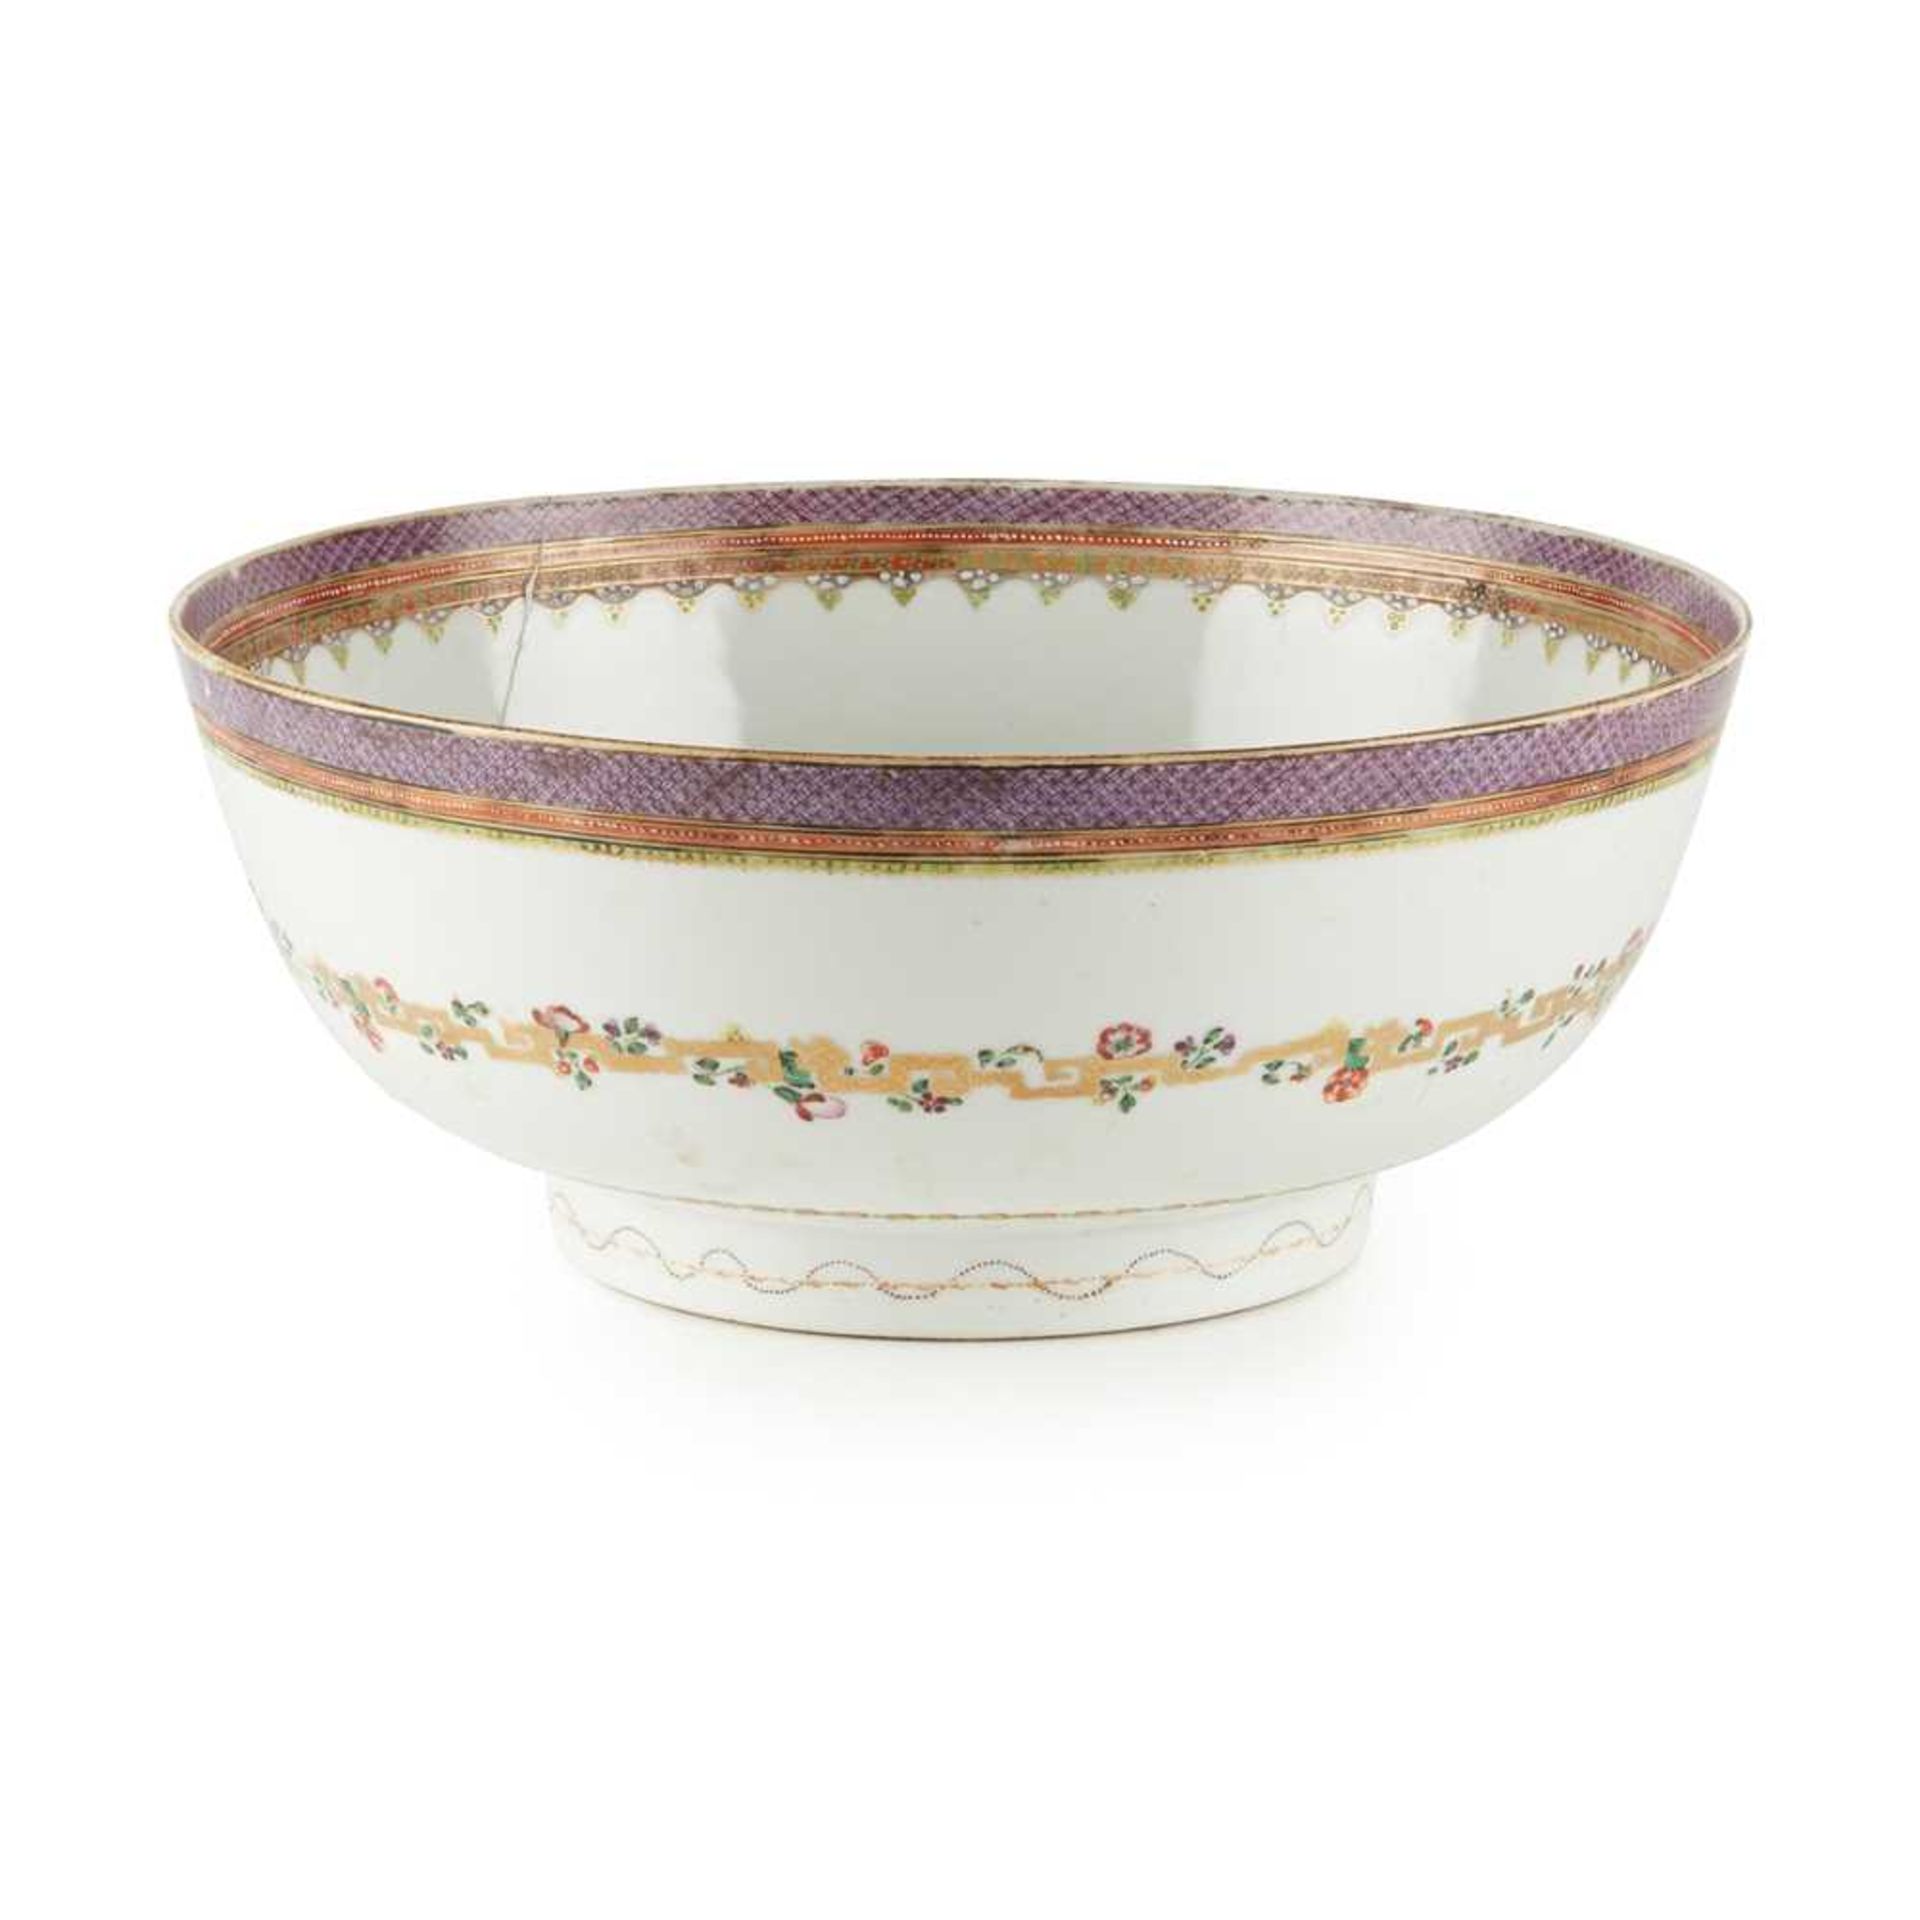 TWO CHINESE EXPORT PORCELAIN PUNCH BOWLS QING DYNASTY, LATE 18TH/19TH CENTURY - Image 2 of 33